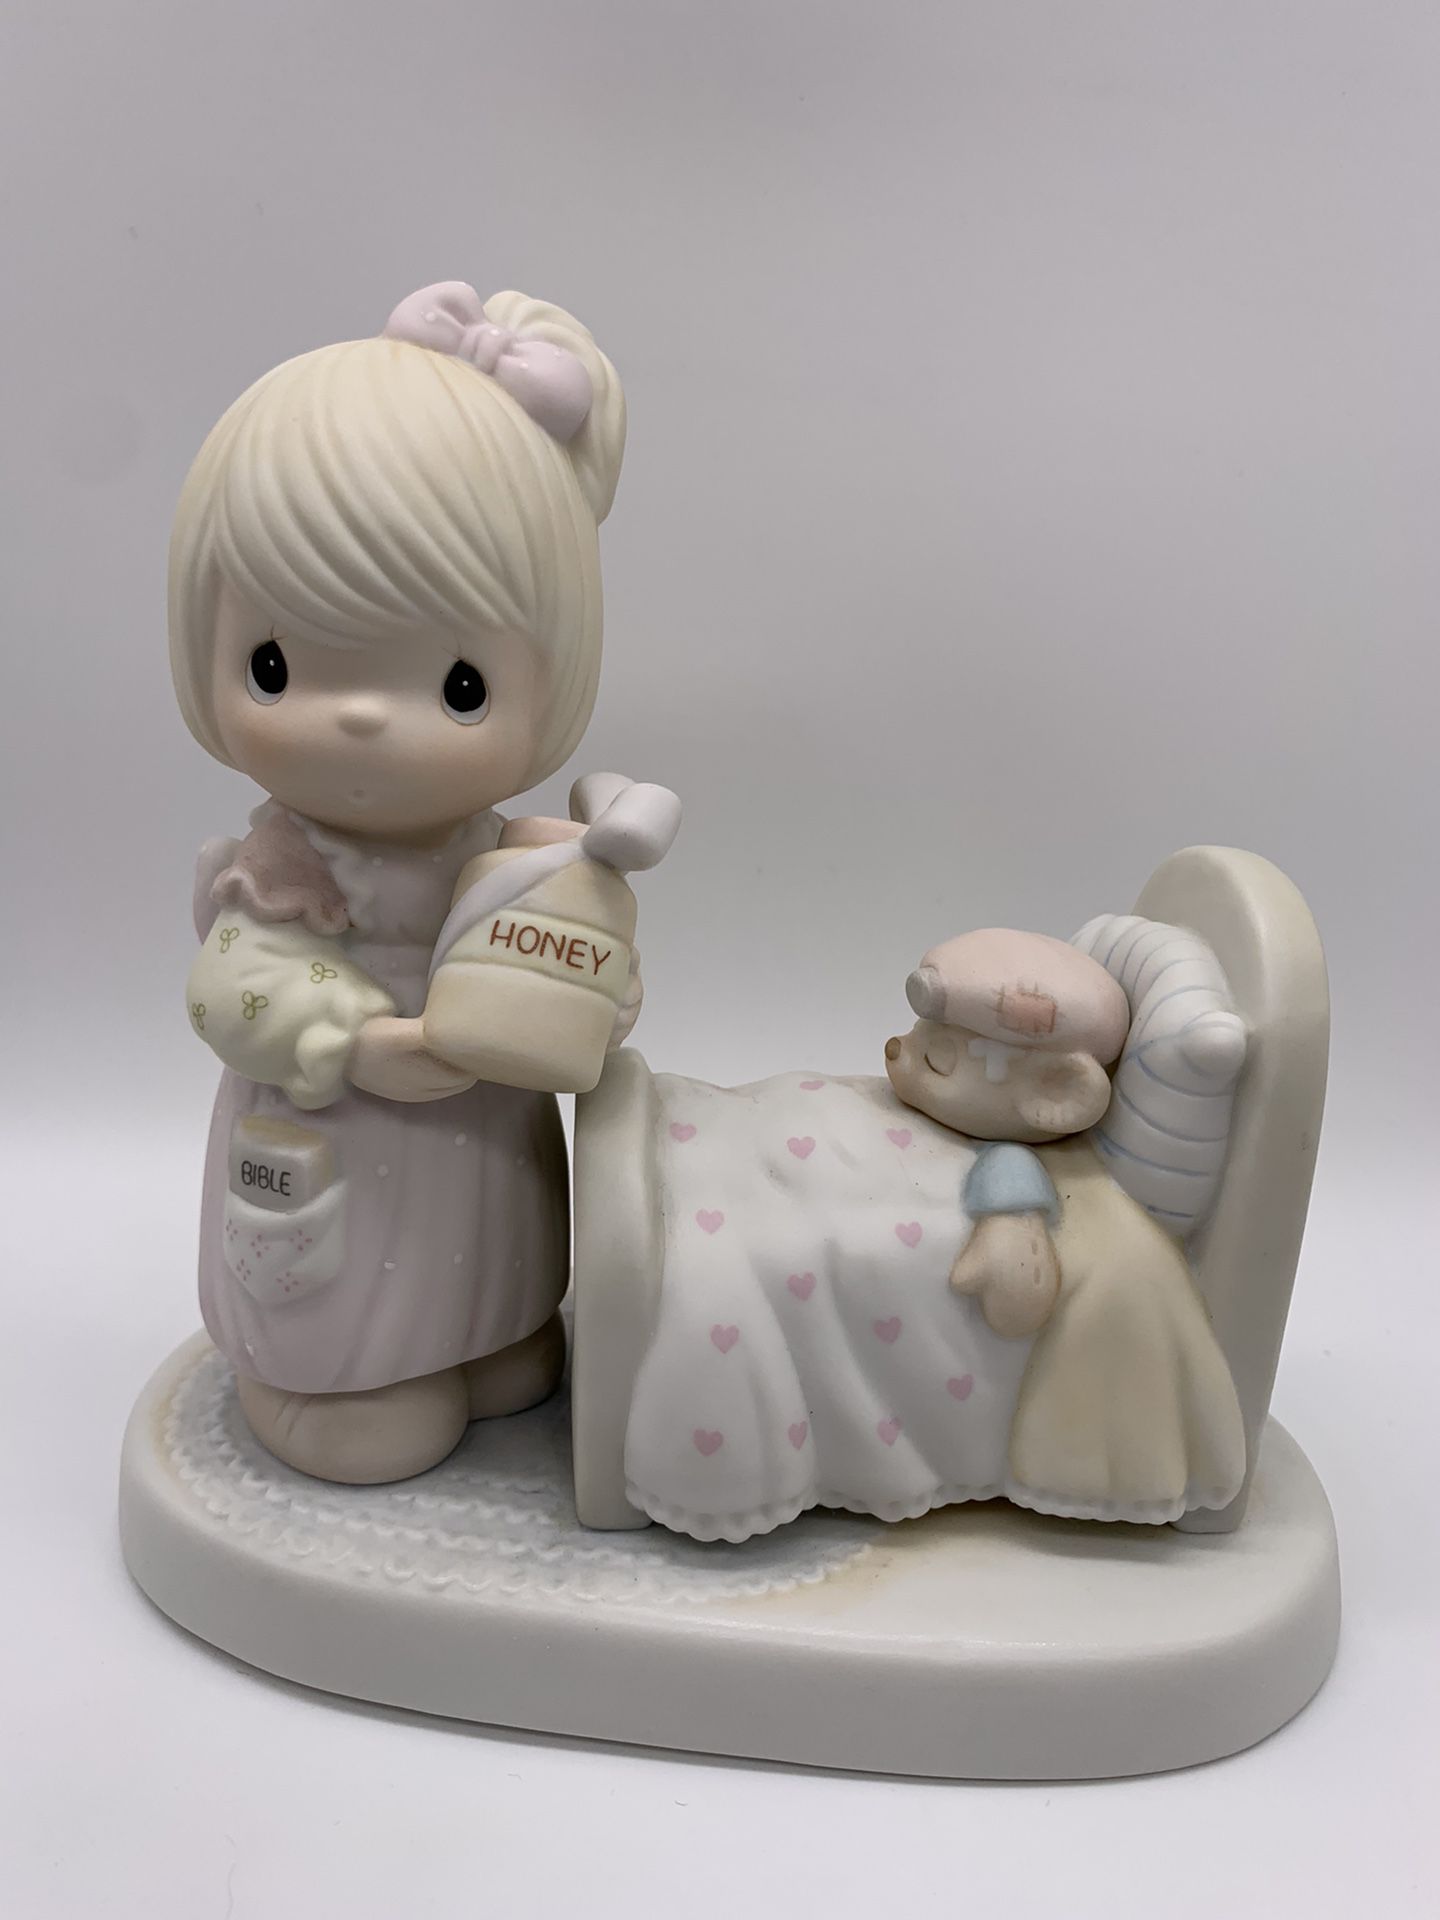 Precious Moments Collectable “Make me a Blessing “